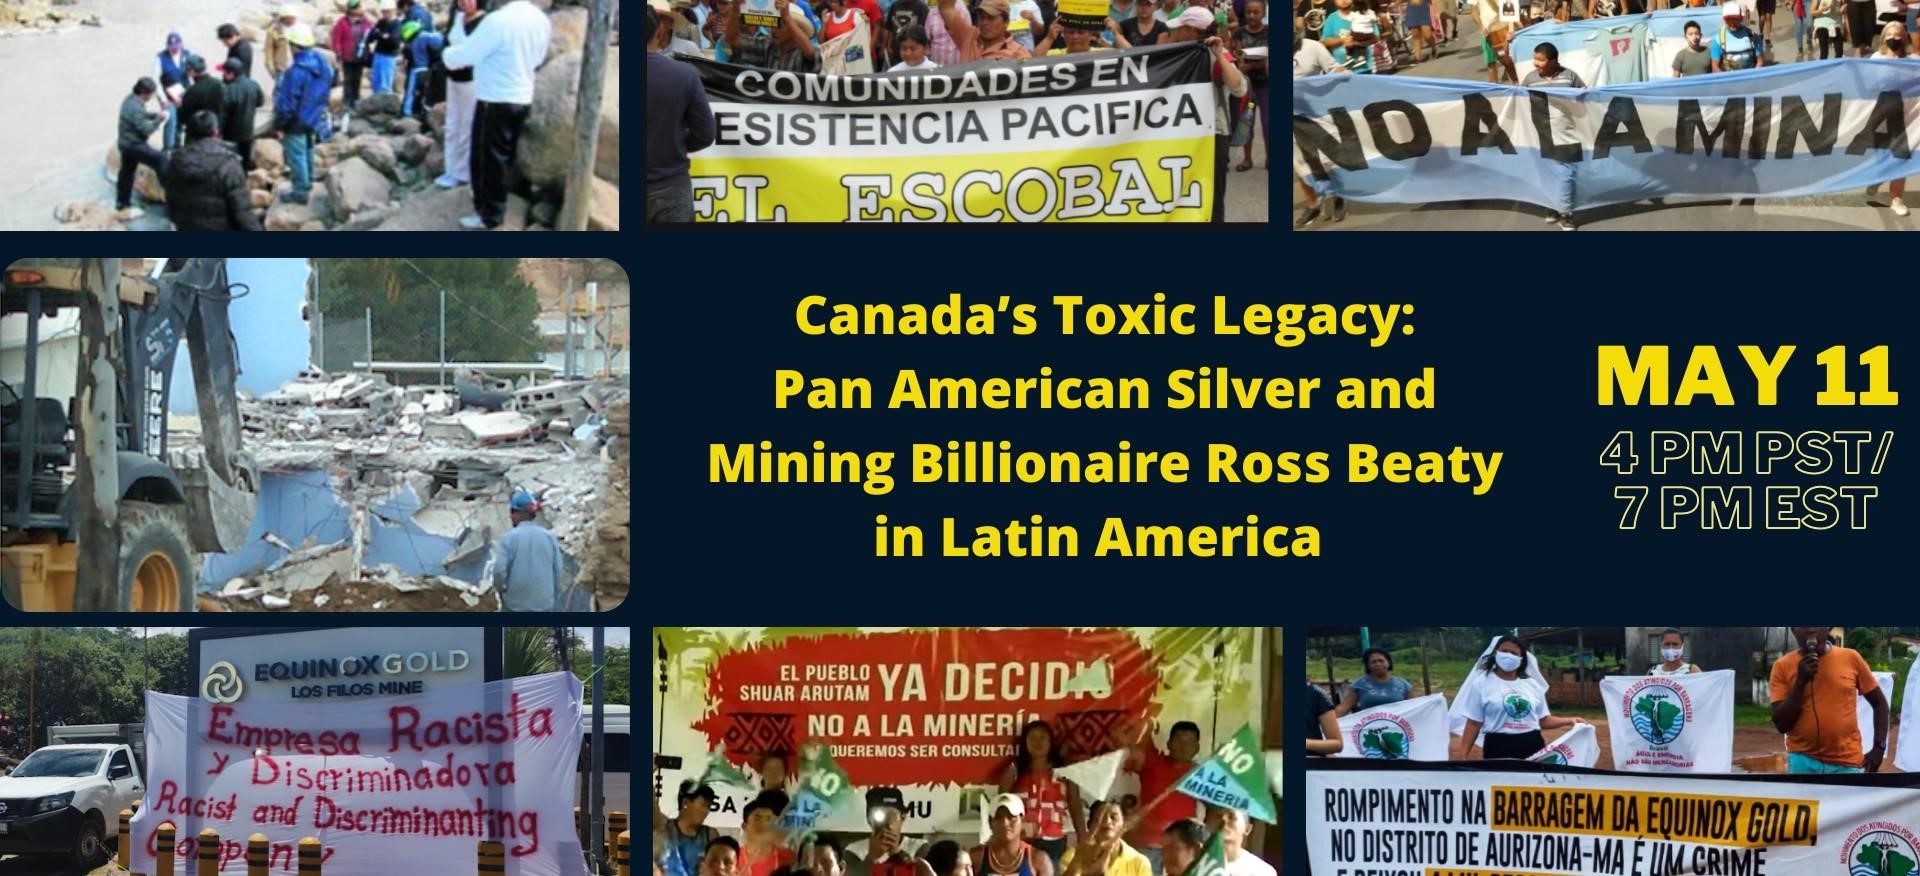 Canada's Toxic Legacy: Pan American Silver and Mining Billionaire Ross Beaty in Latin America